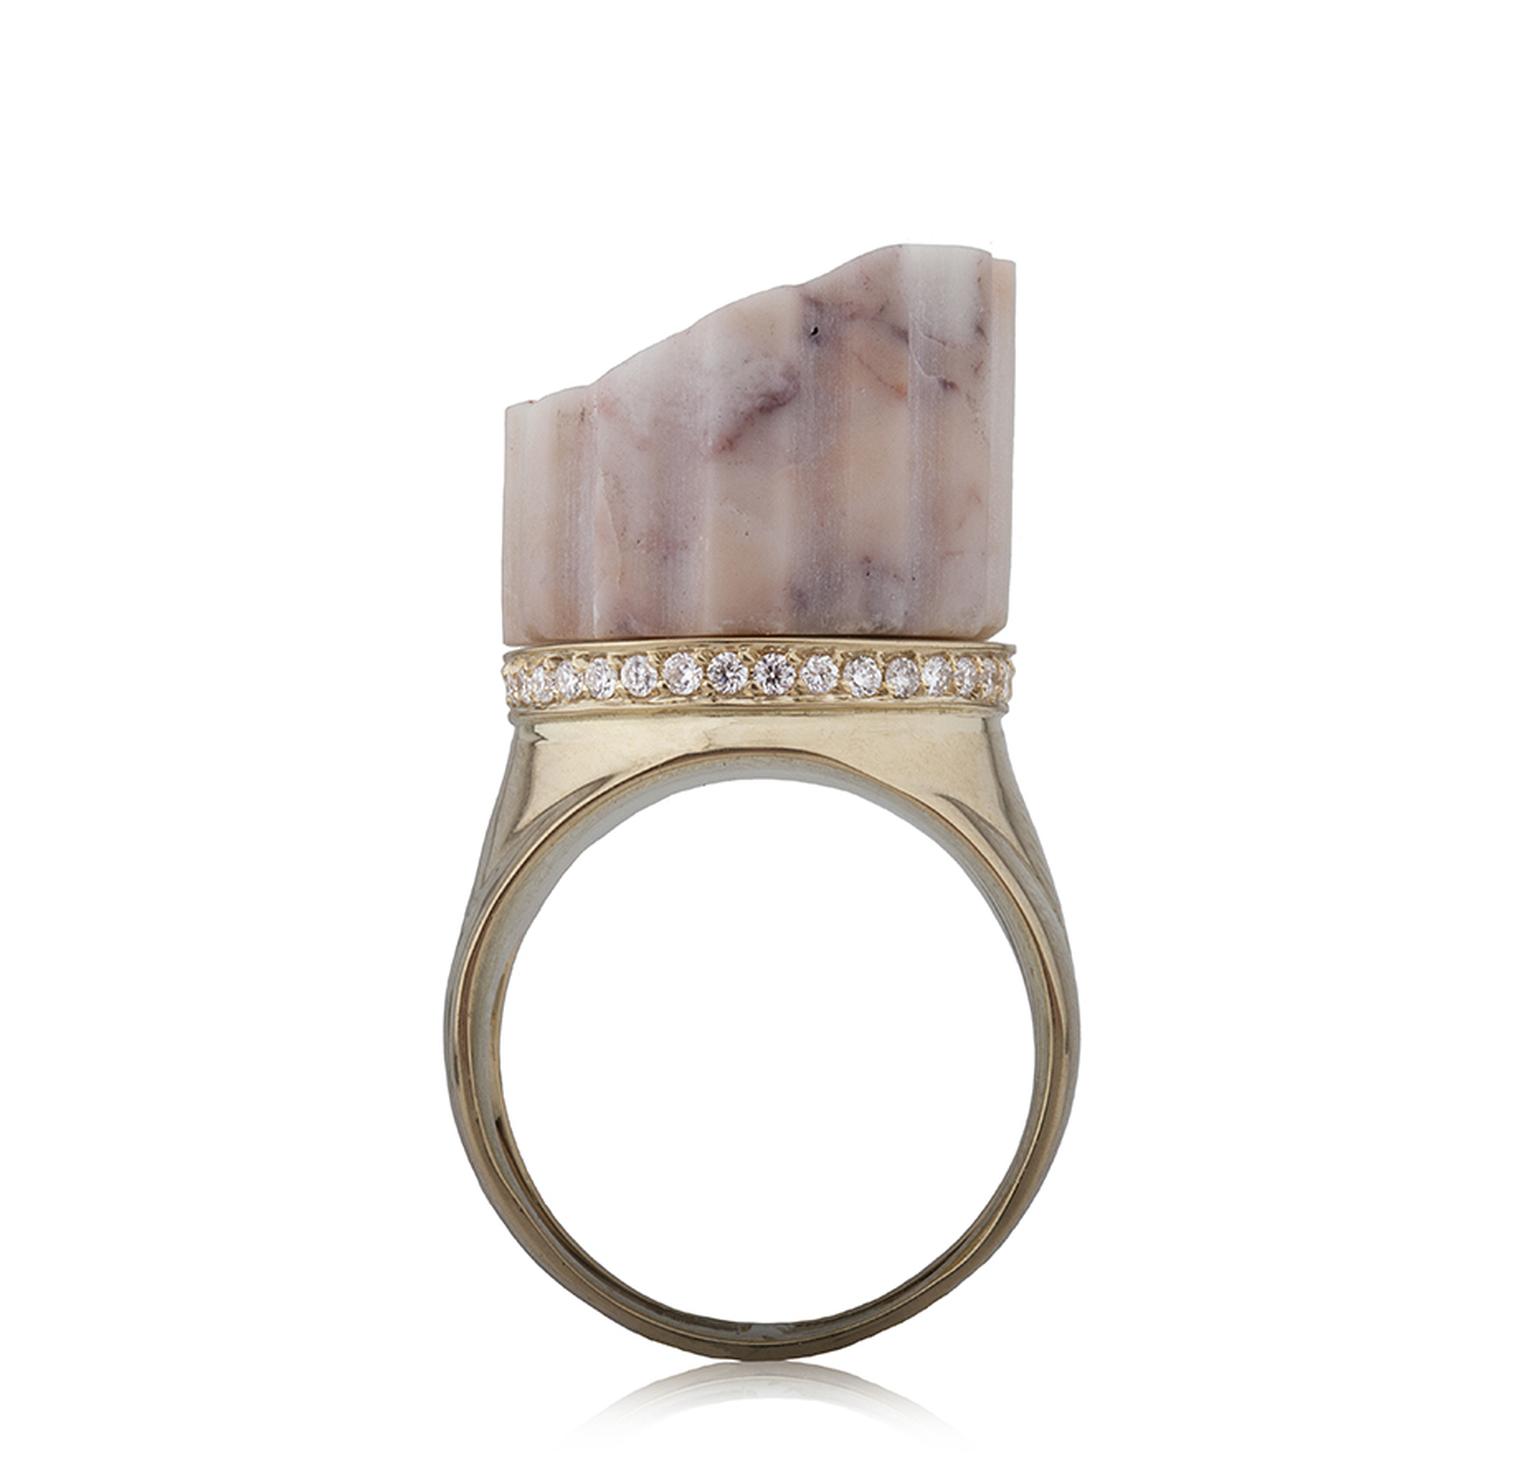 Latest Revival Maiyet gold geometric cage bangle featuring rose cut champagne diamonds (4.88ct).